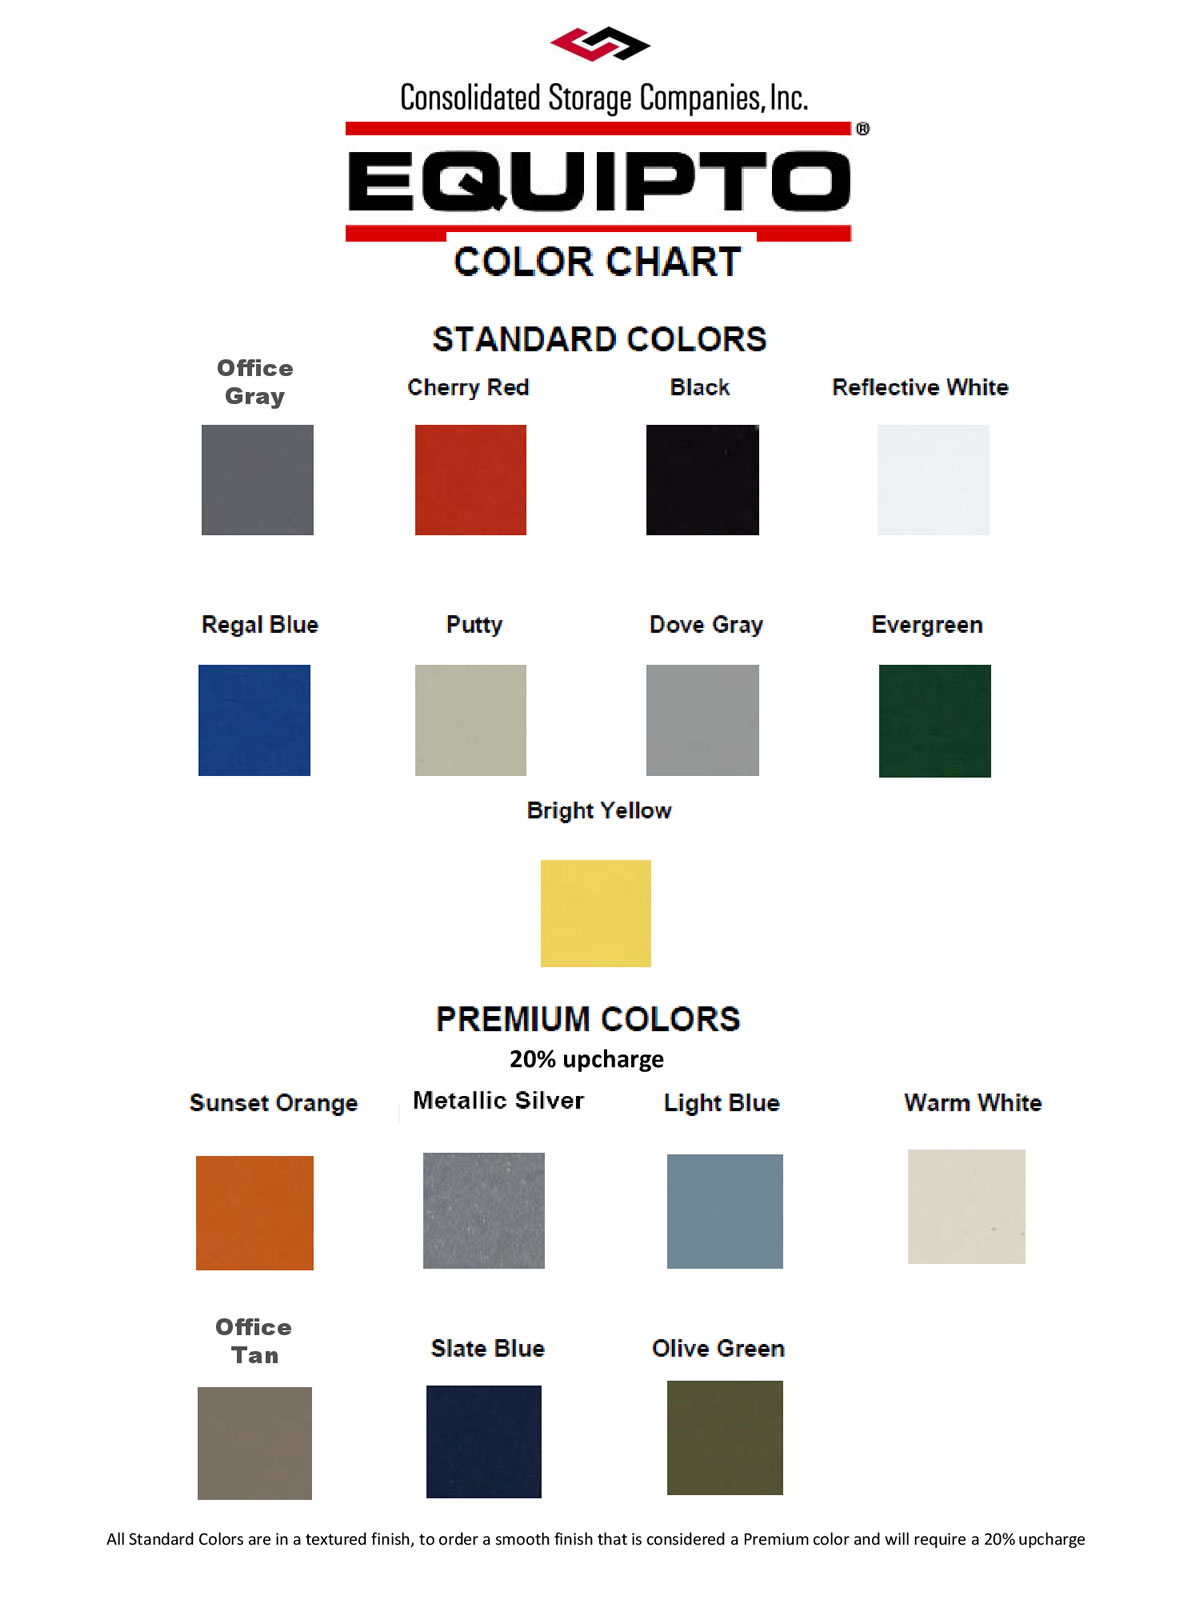 equipto_color_chart_2-6-15-_2_